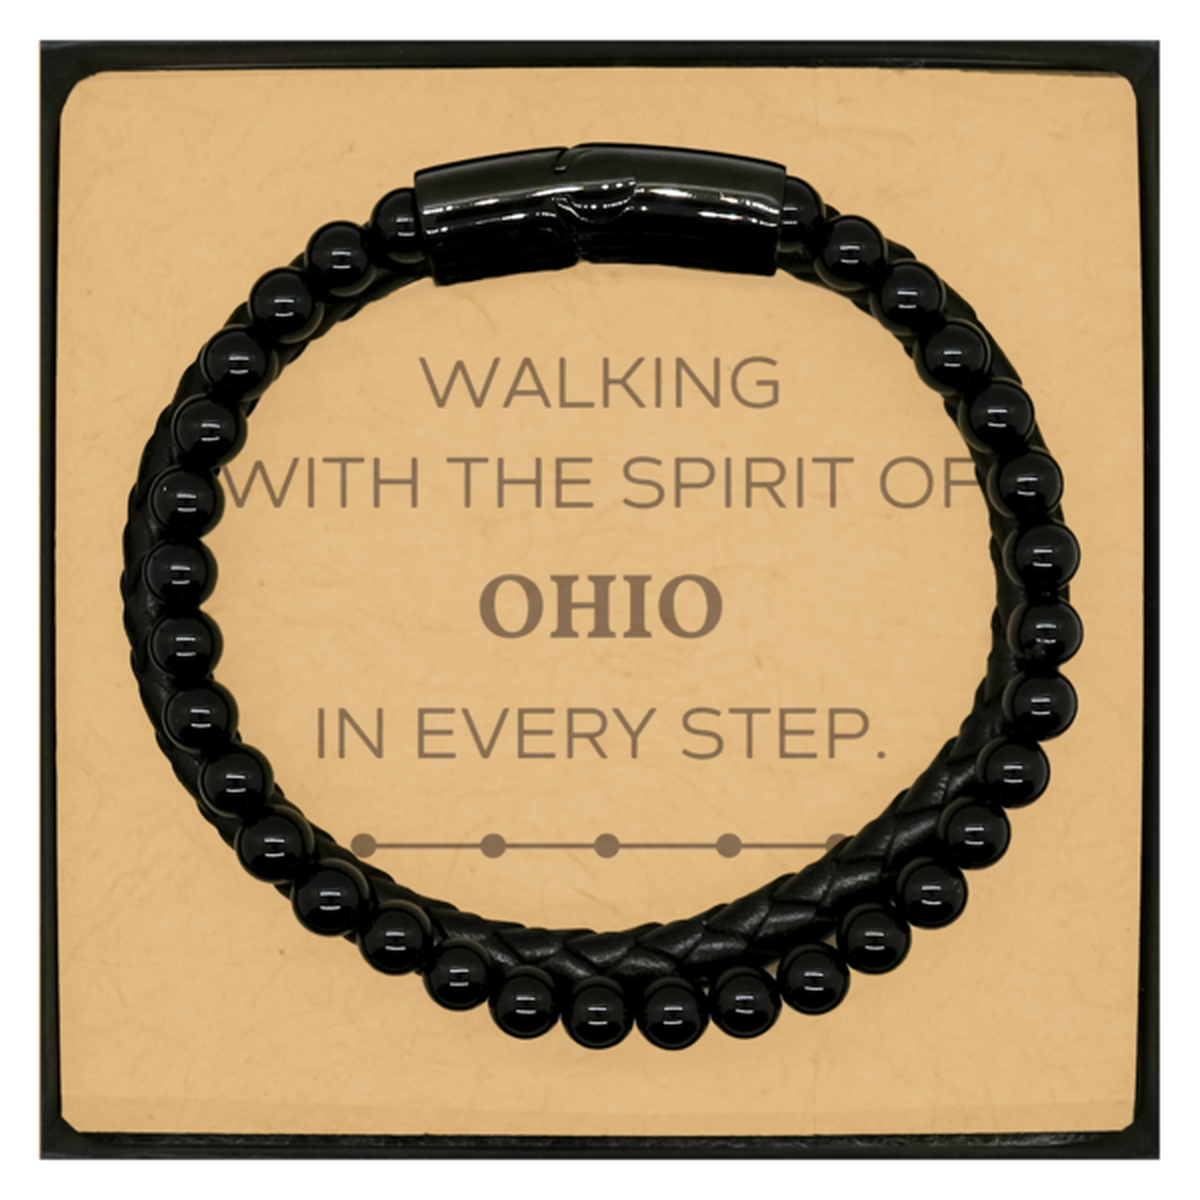 Ohio Gifts, Walking with the spirit, Love Ohio Birthday Christmas Stone Leather Bracelets For Ohio People, Men, Women, Friends